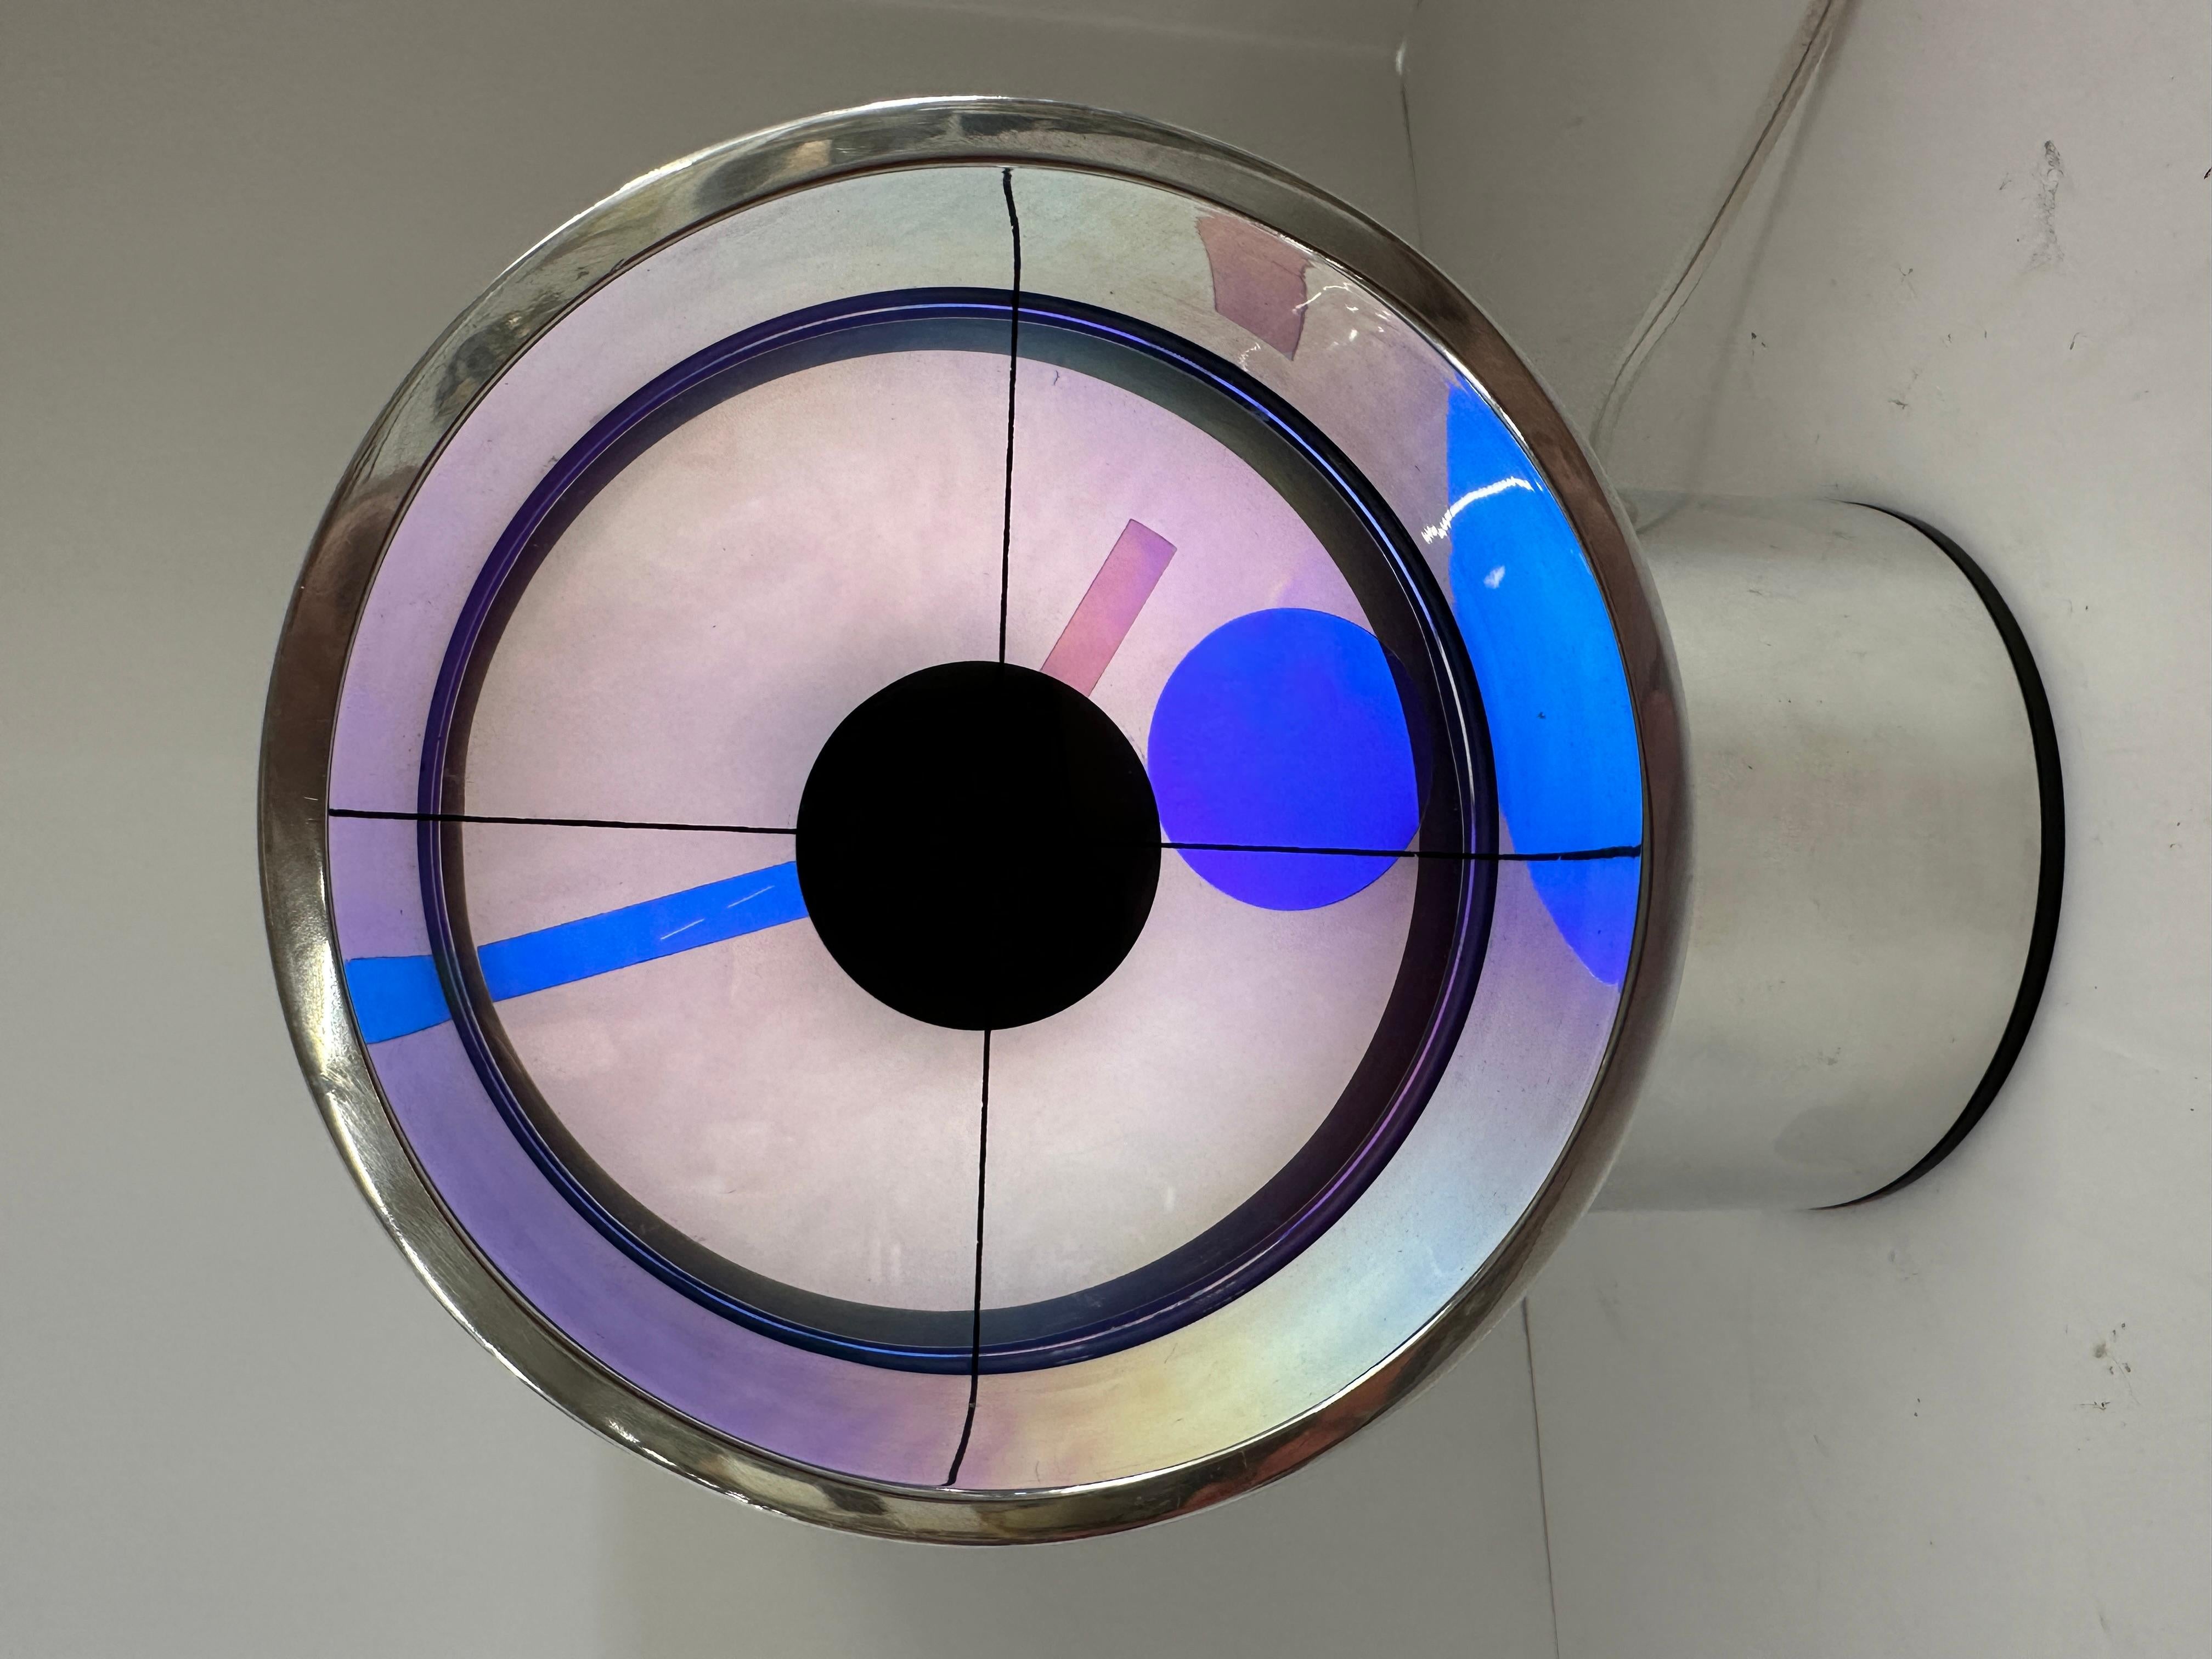 A vintage 1970's Aurora clock. These stunning clocks are in the collection of the Museum of Modern Art MOMA in NY. Developed in the 1970's by a NASA engineer and an architect these stunners were first produced by Rathcon and later for mass